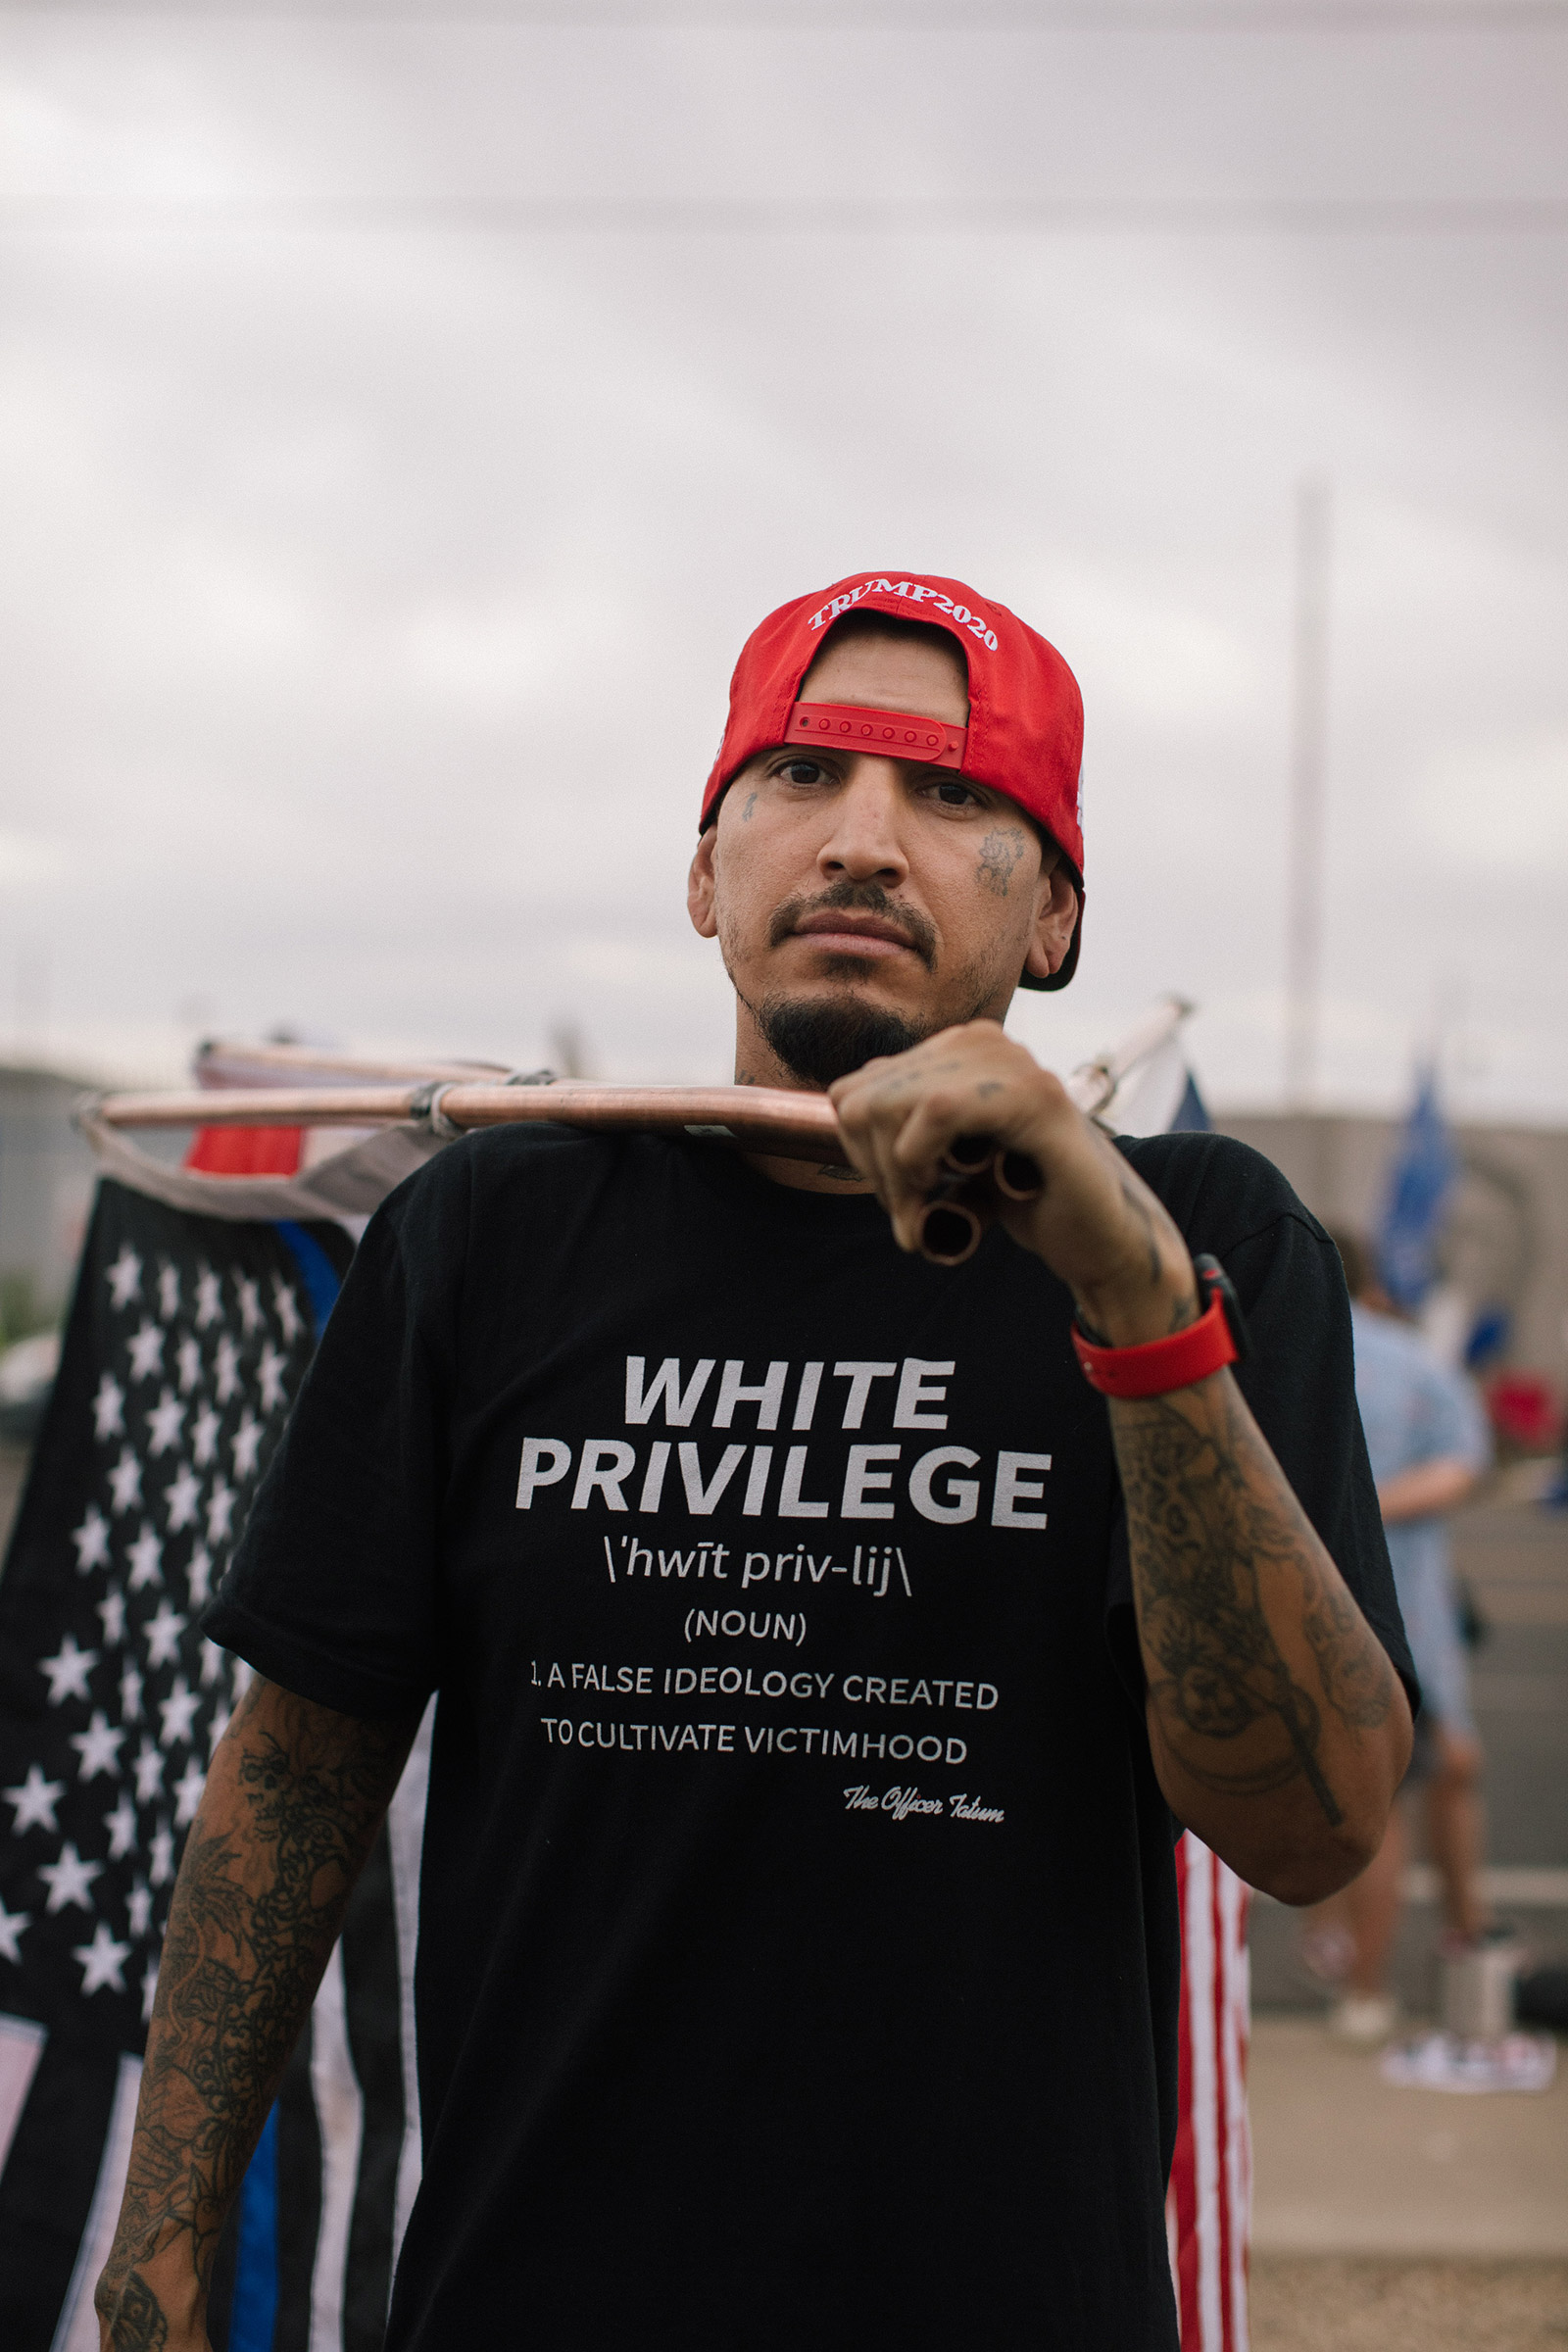 A man wears a white privilege shirt at the Maricopa County Elections Department office in Phoenix, AZ on November 6, 2020